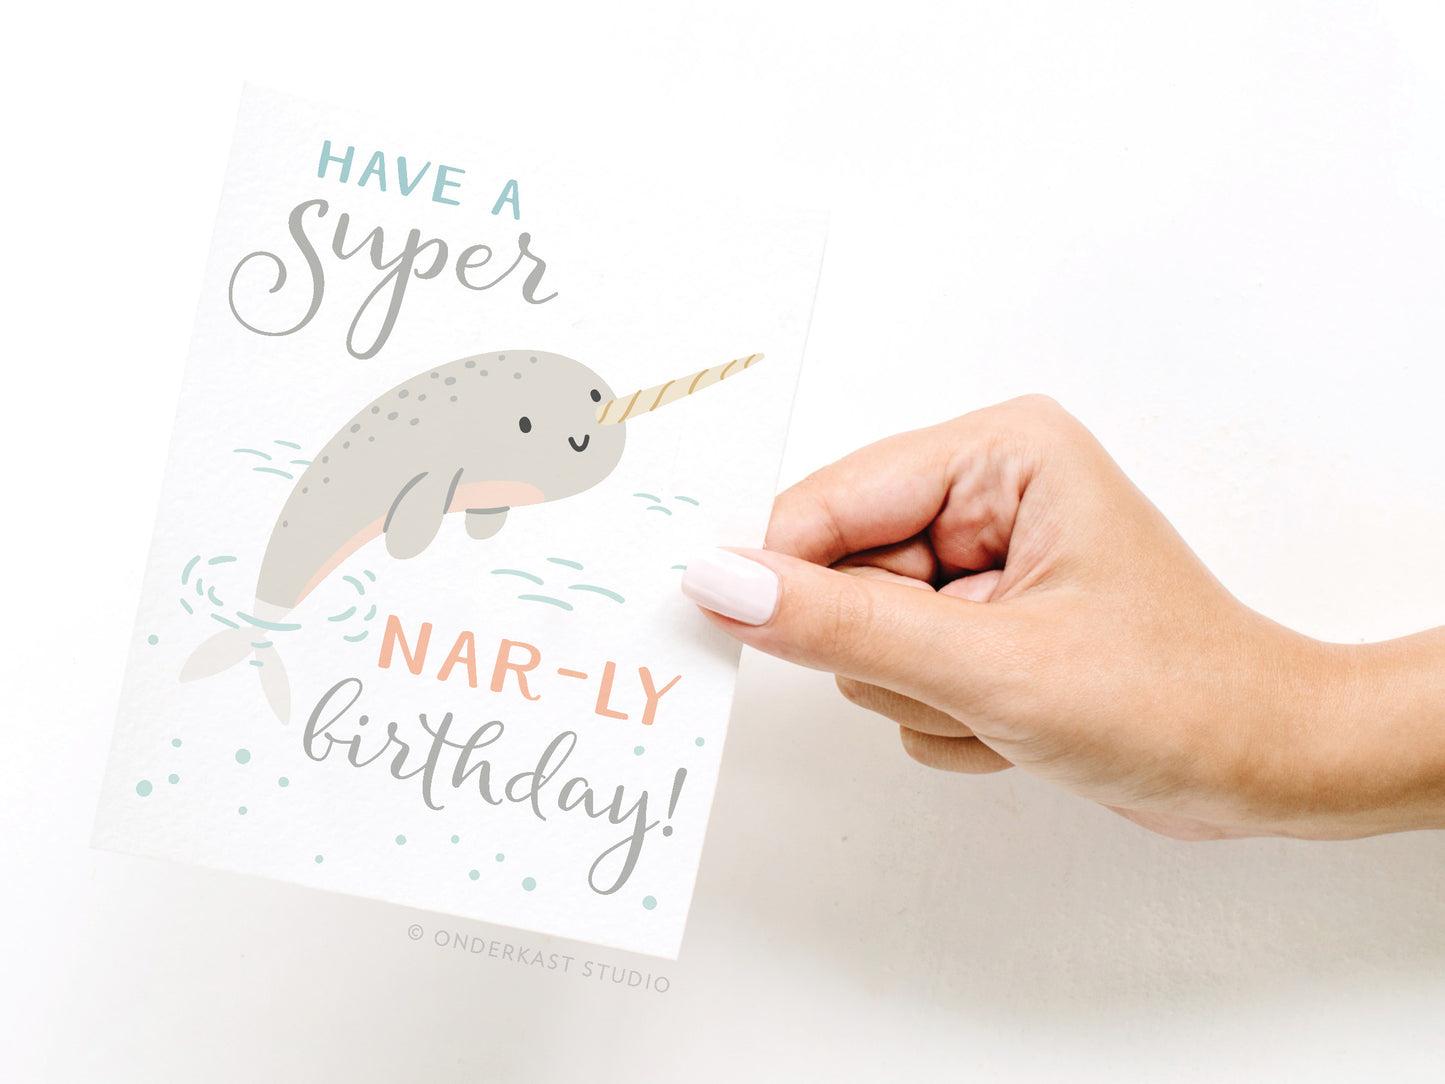 Have a Super Nar-ly Birthday Greeting Card  - Doodlebug's Children's Boutique